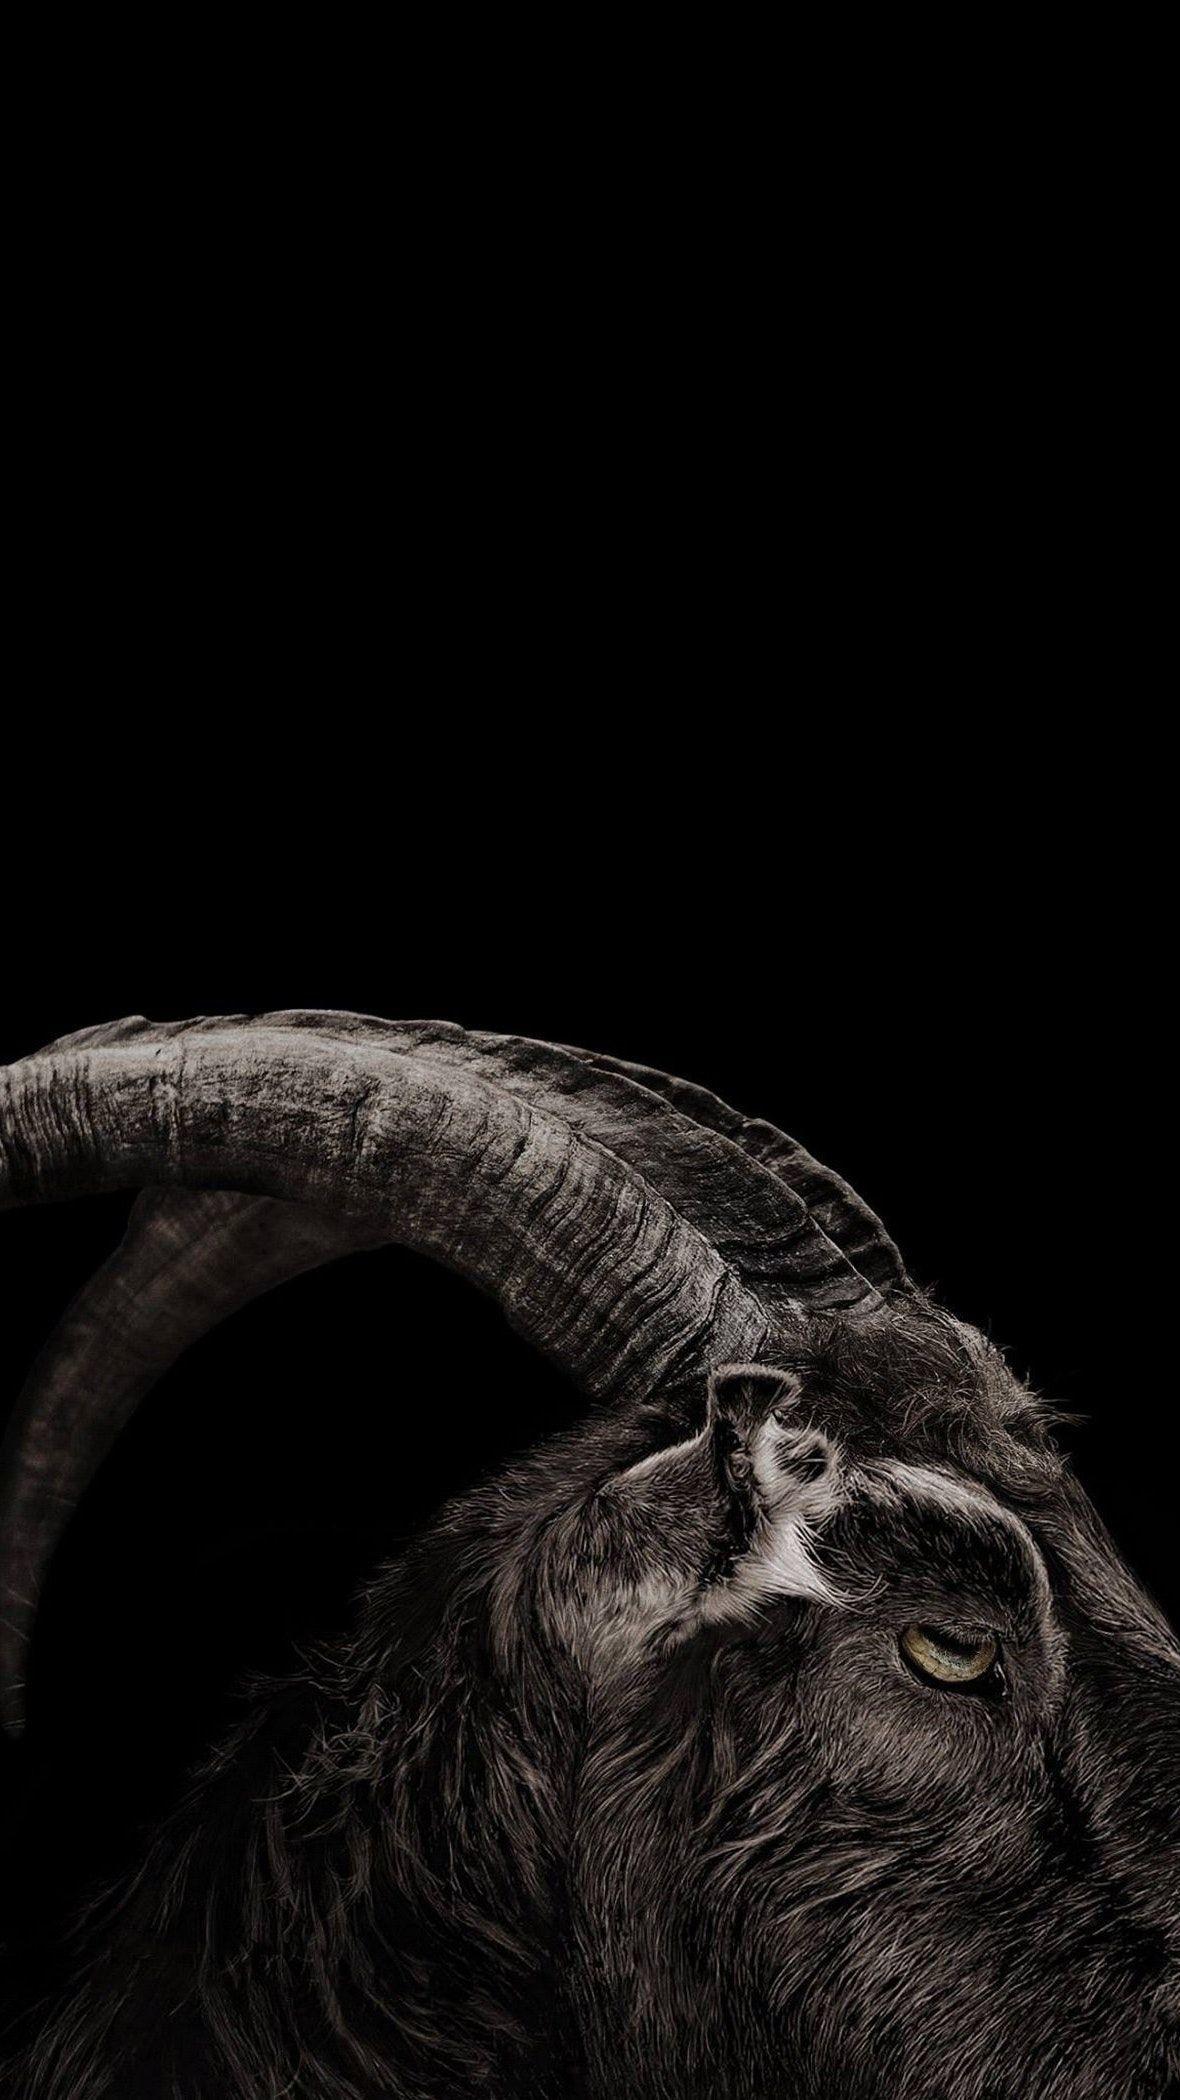 The Witch (2016) Phone Wallpaper. Moviemania. Witch wallpaper, Witchy wallpaper, Satanic art